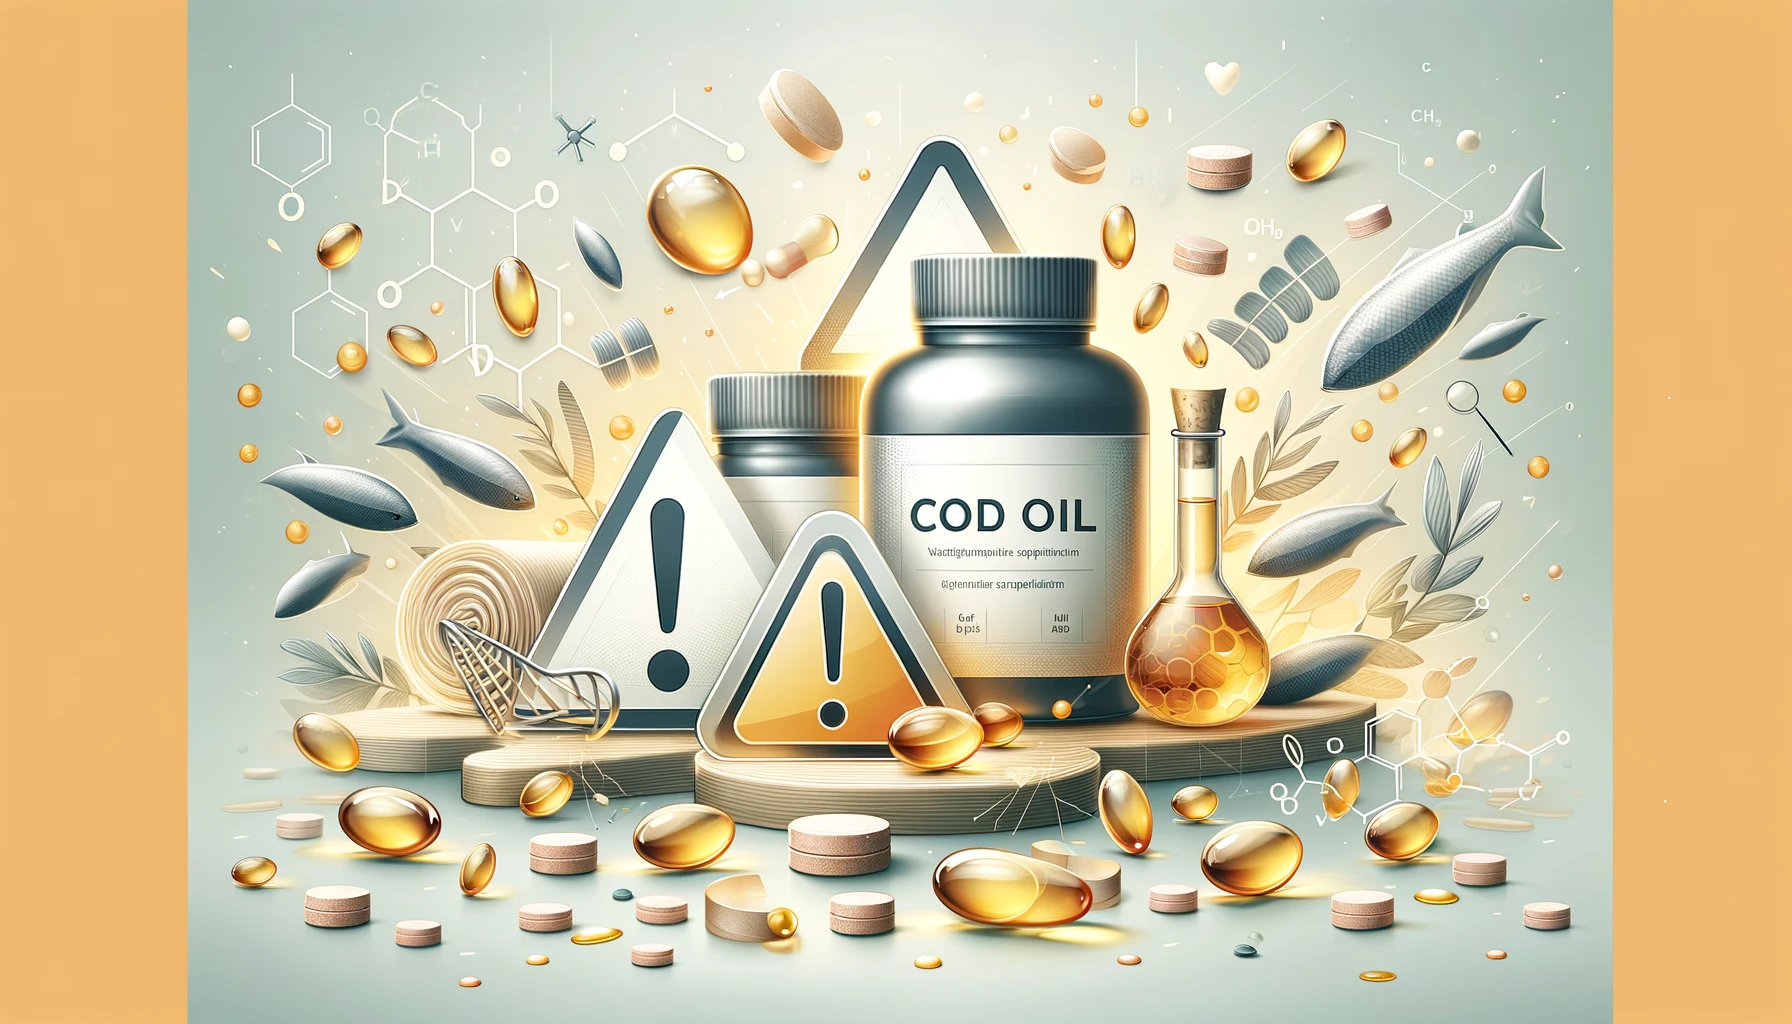 cod liver oil side effects